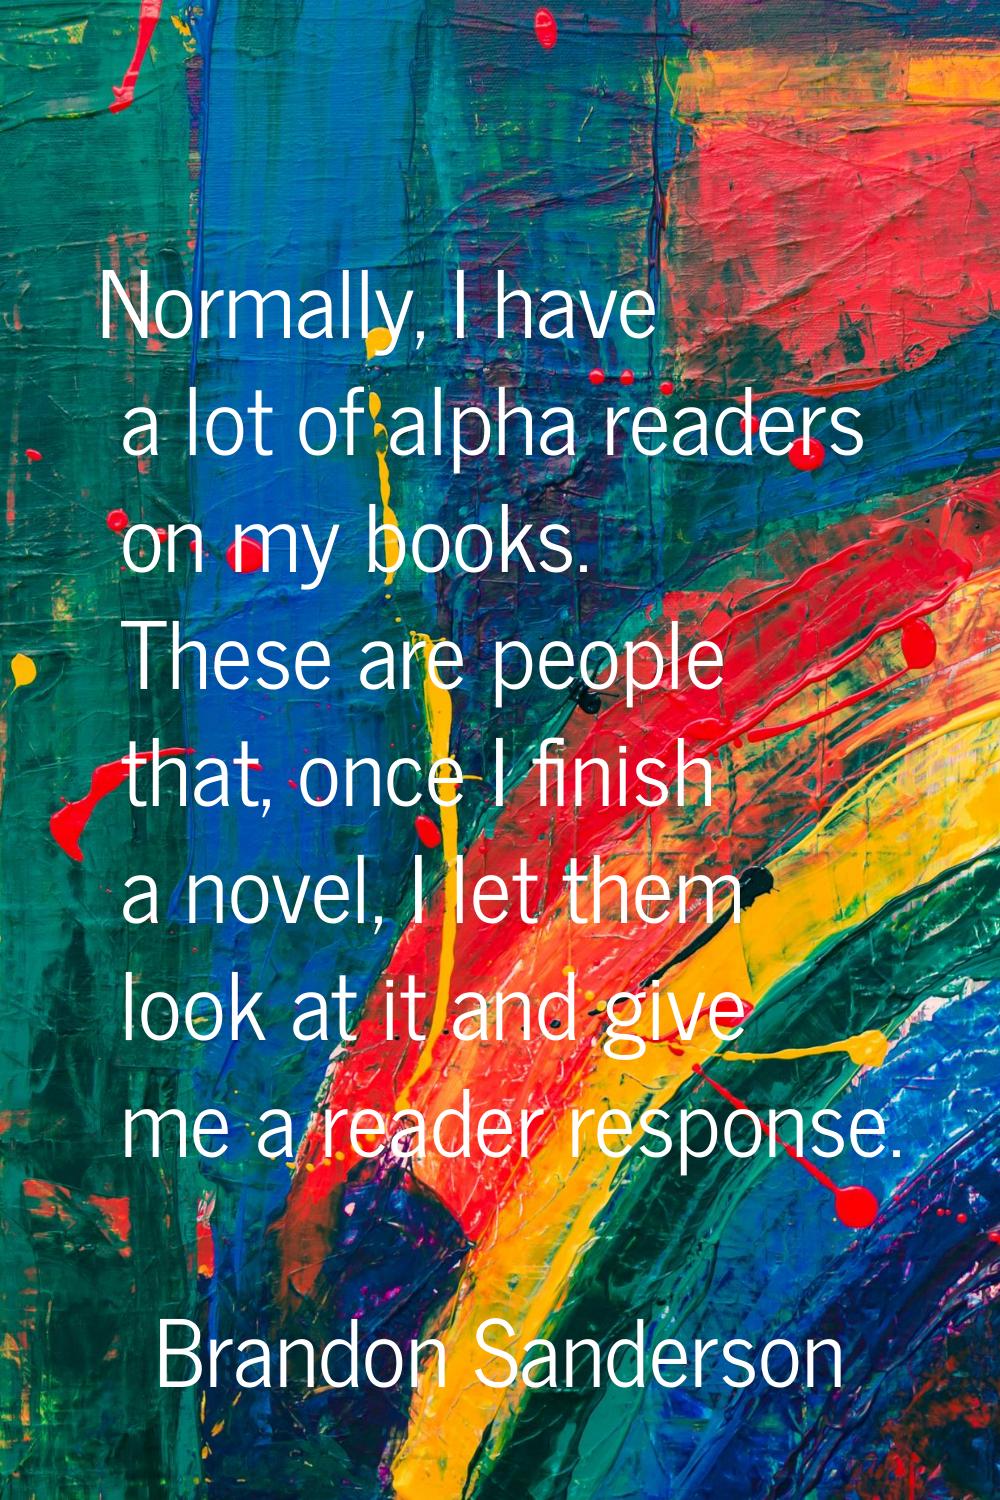 Normally, I have a lot of alpha readers on my books. These are people that, once I finish a novel, 